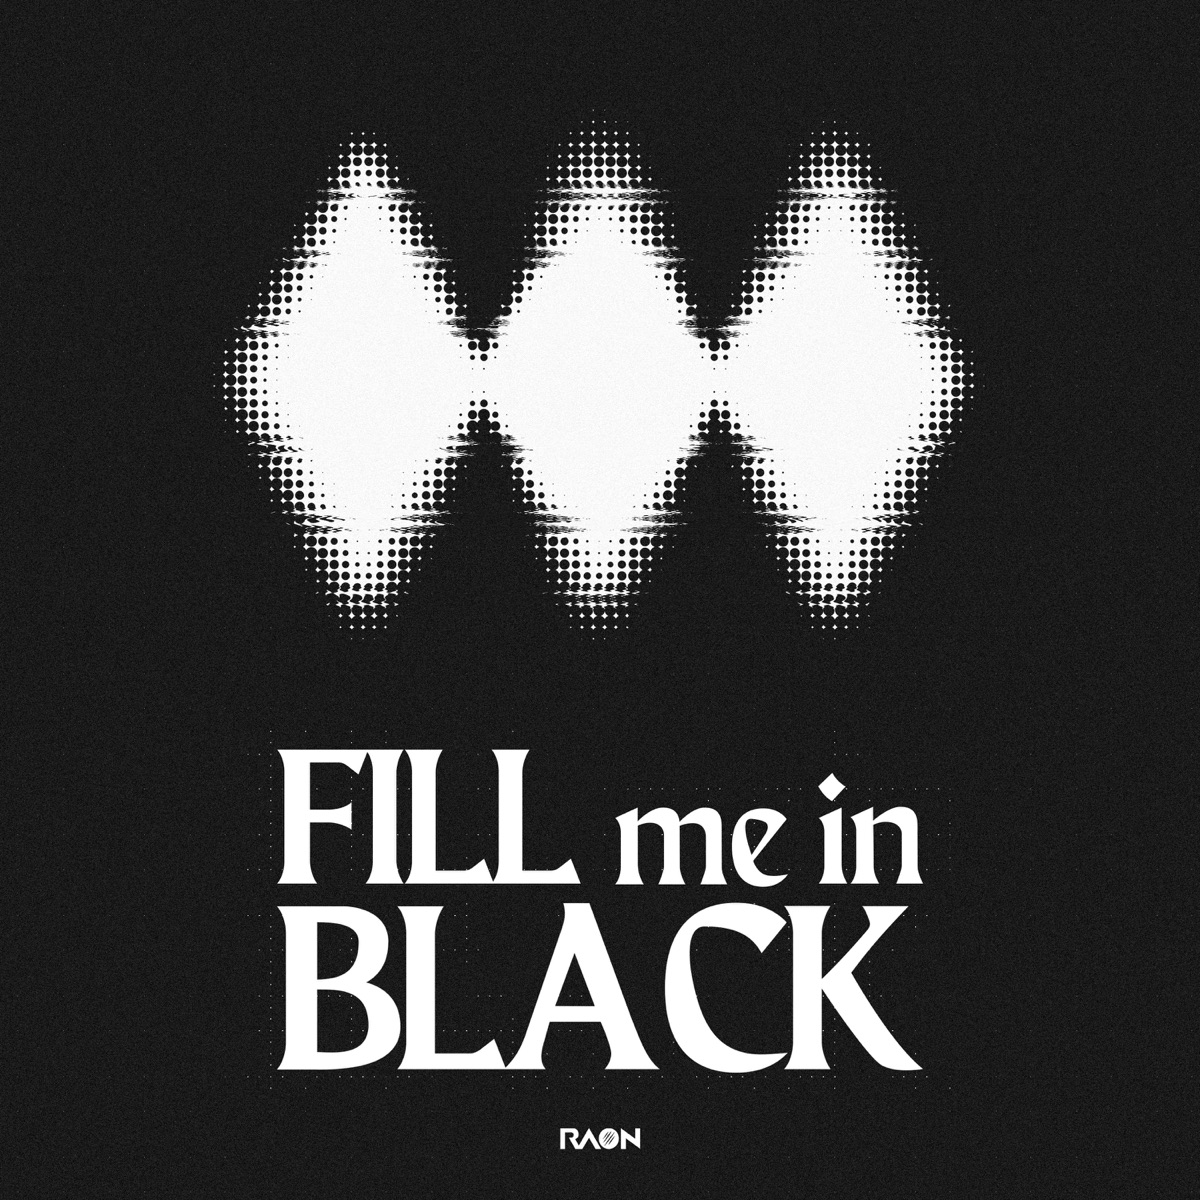 Cover art for『Raon - FILL me in BLACK』from the release『FILL me in BLACK』